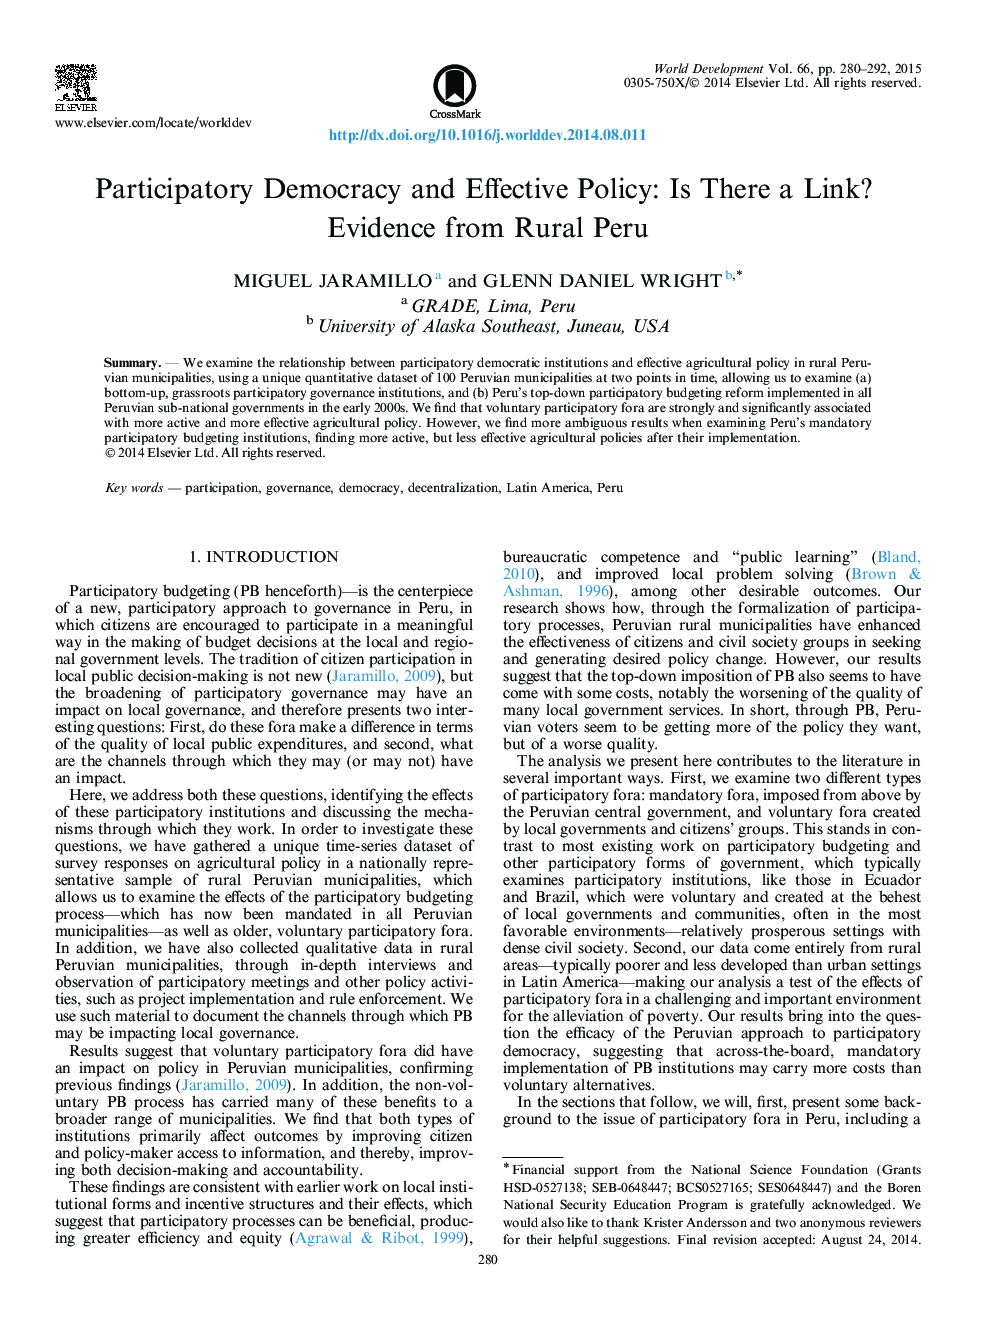 Participatory Democracy and Effective Policy: Is There a Link? Evidence from Rural Peru